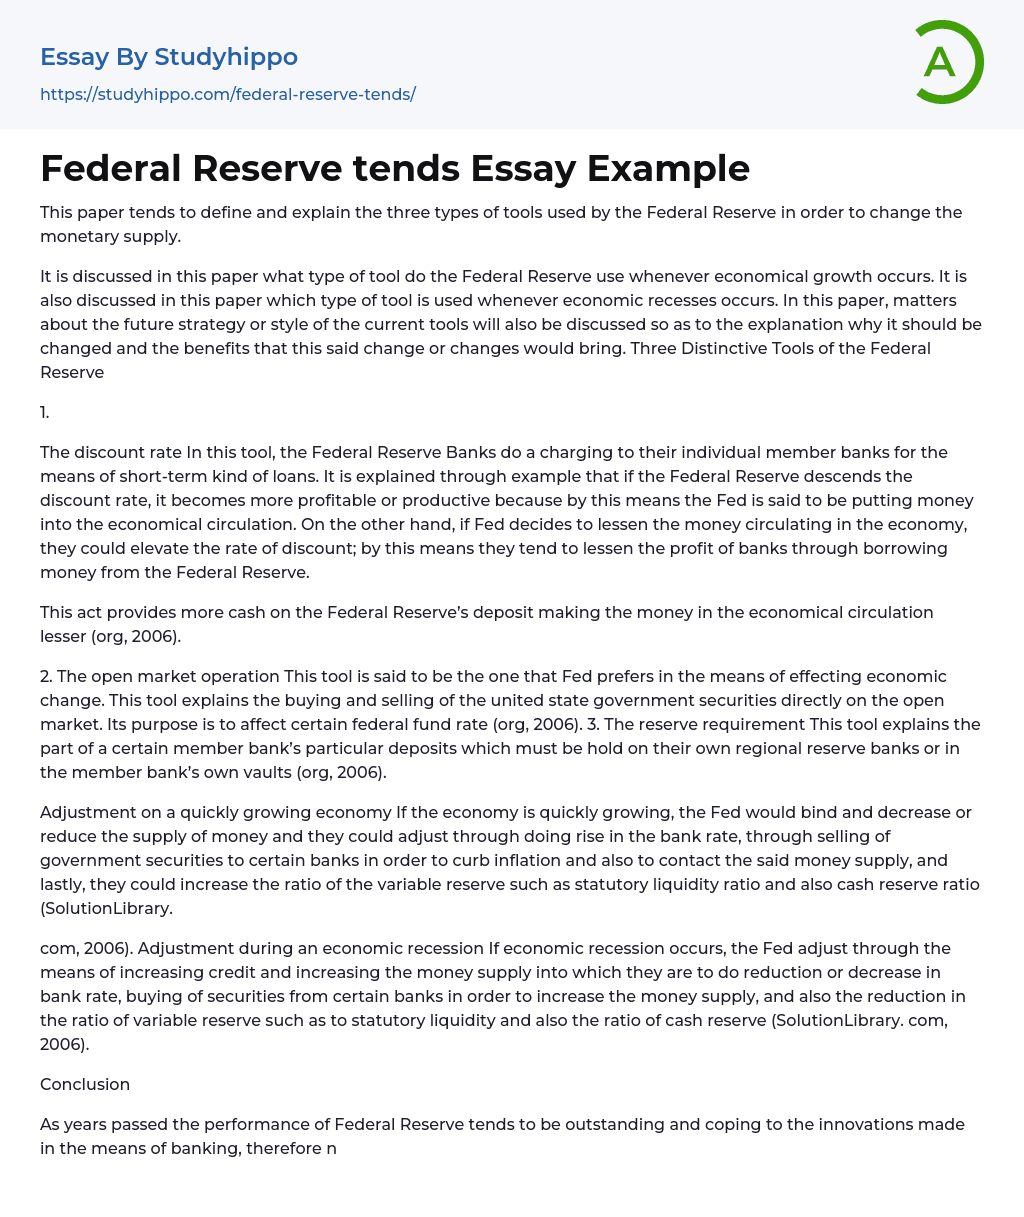 Federal Reserve tends Essay Example